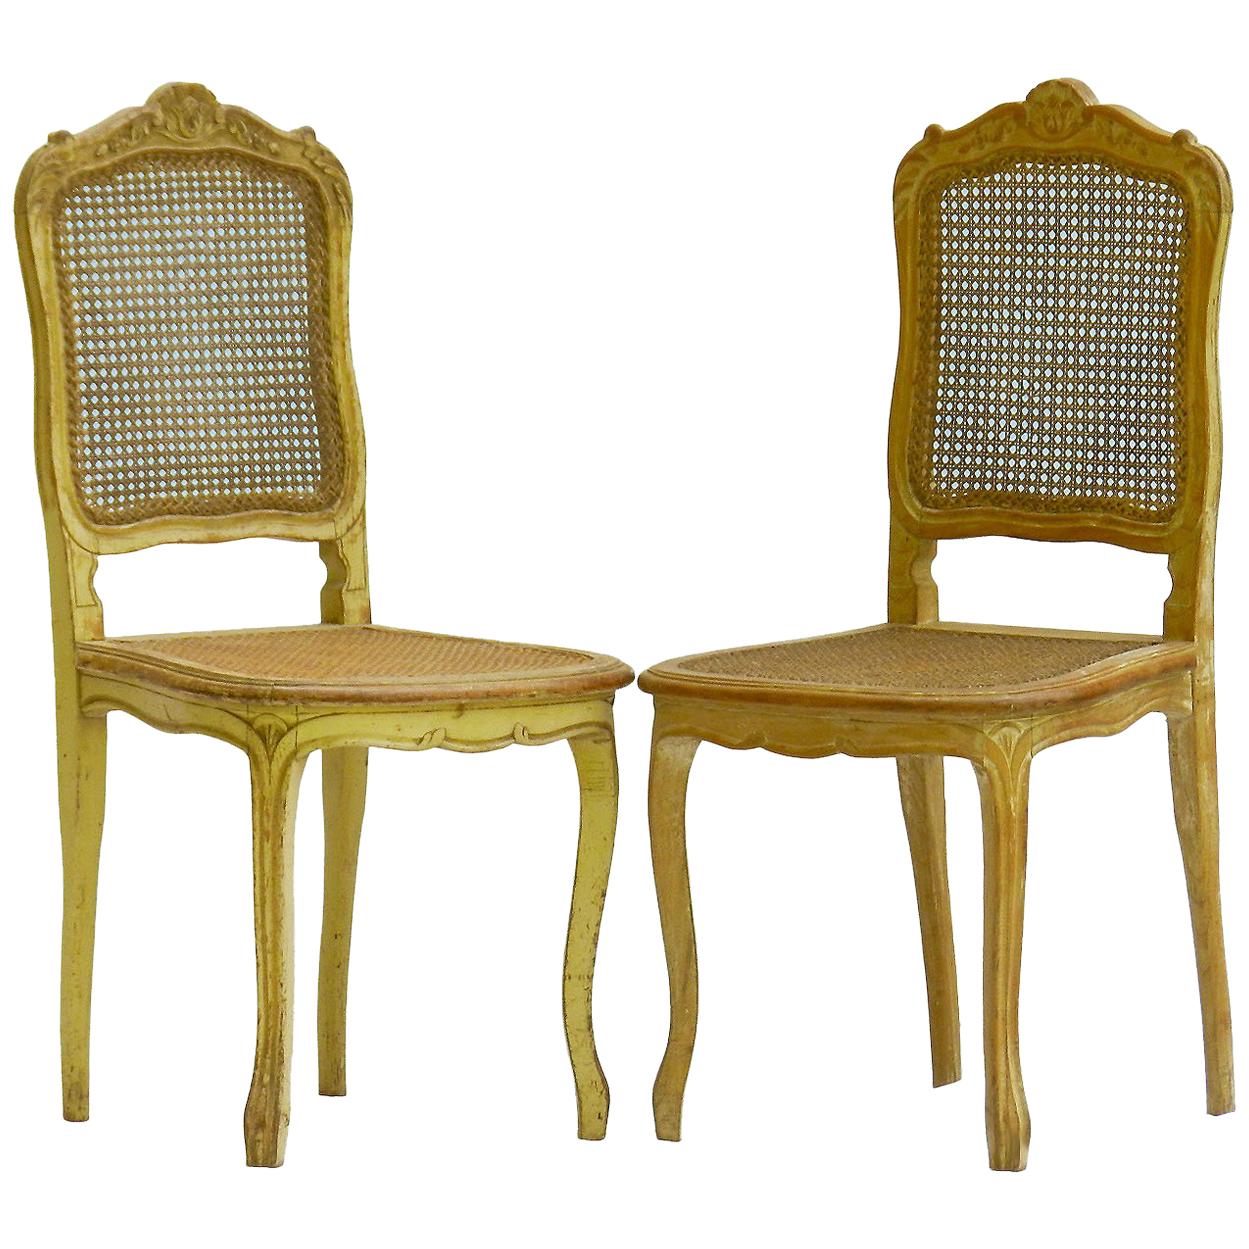 Pair of 19th Century Side Chairs French Louis XV Revival Original Paint Caned